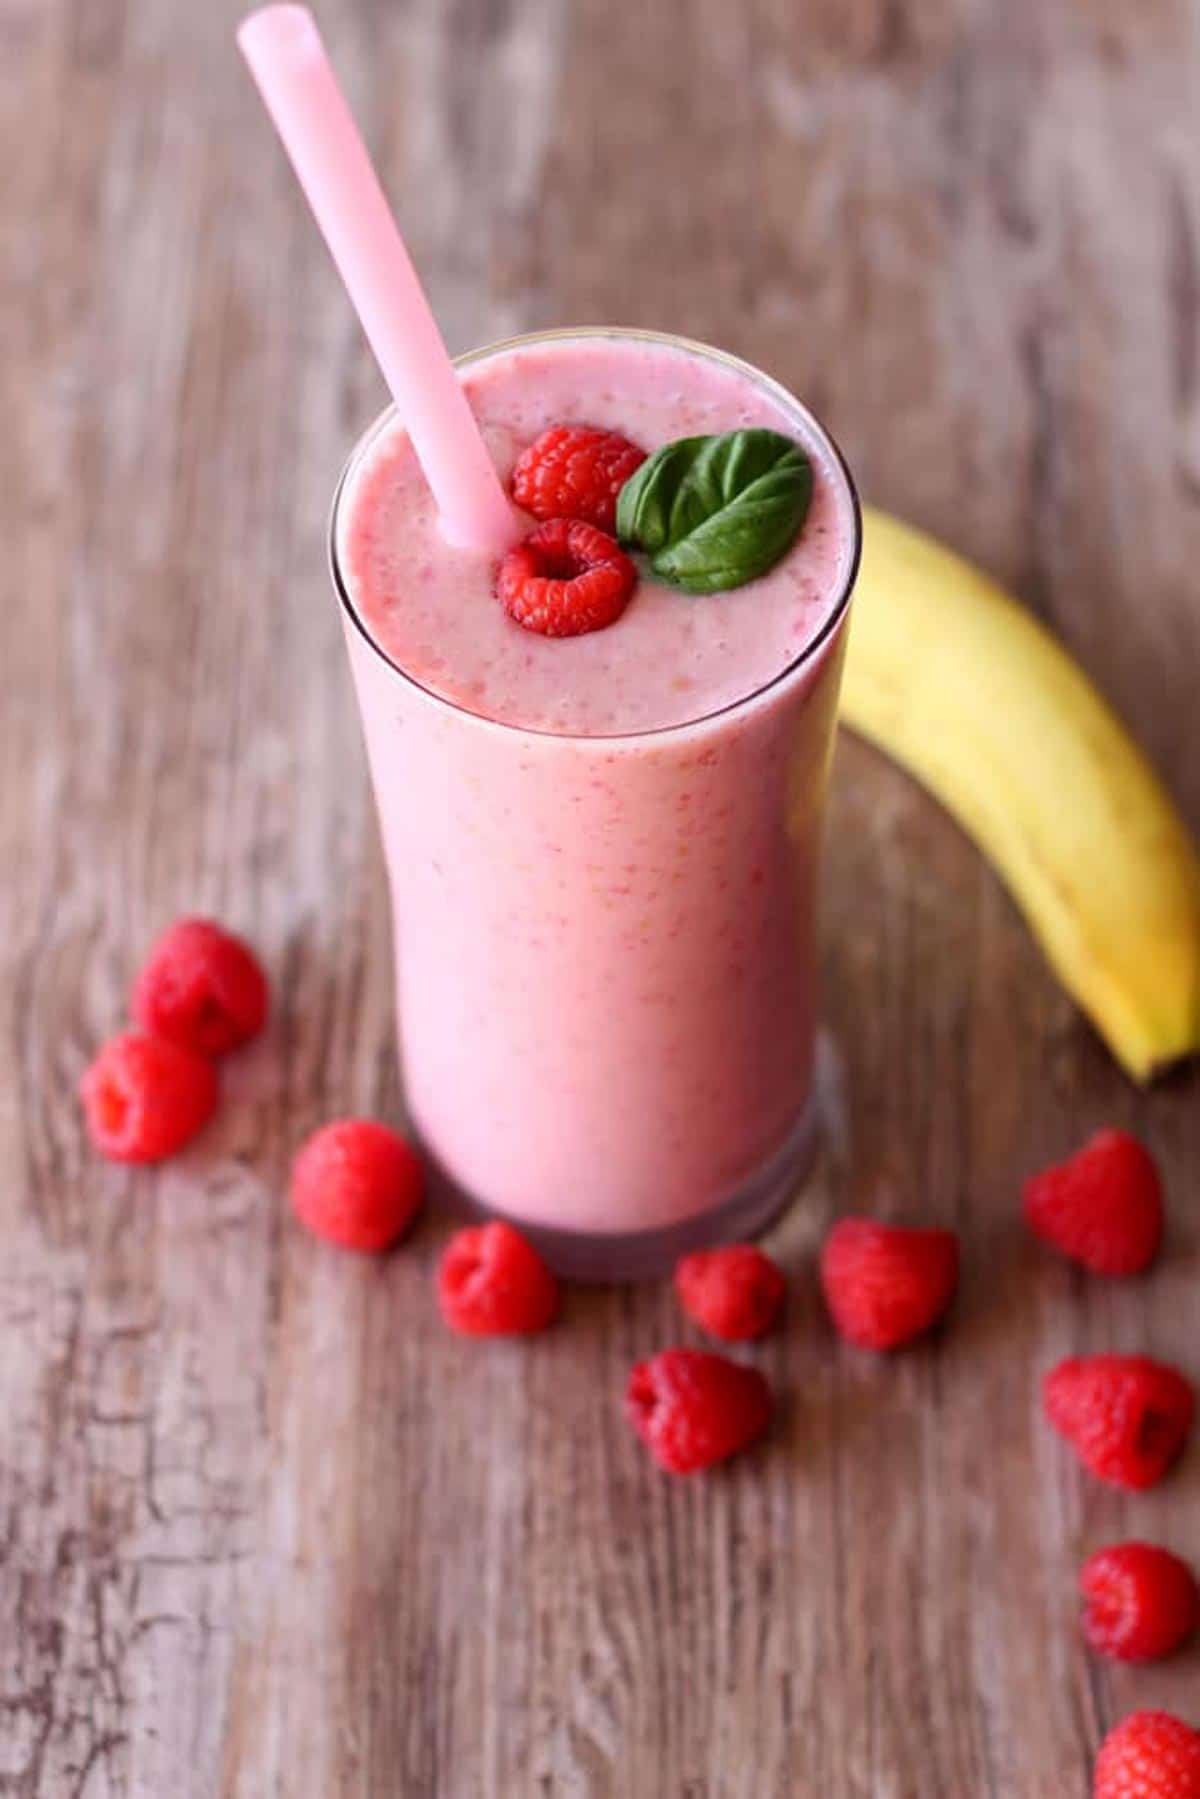 Quick and Easy Raspberry Smoothie - Recipes Worth Repeating